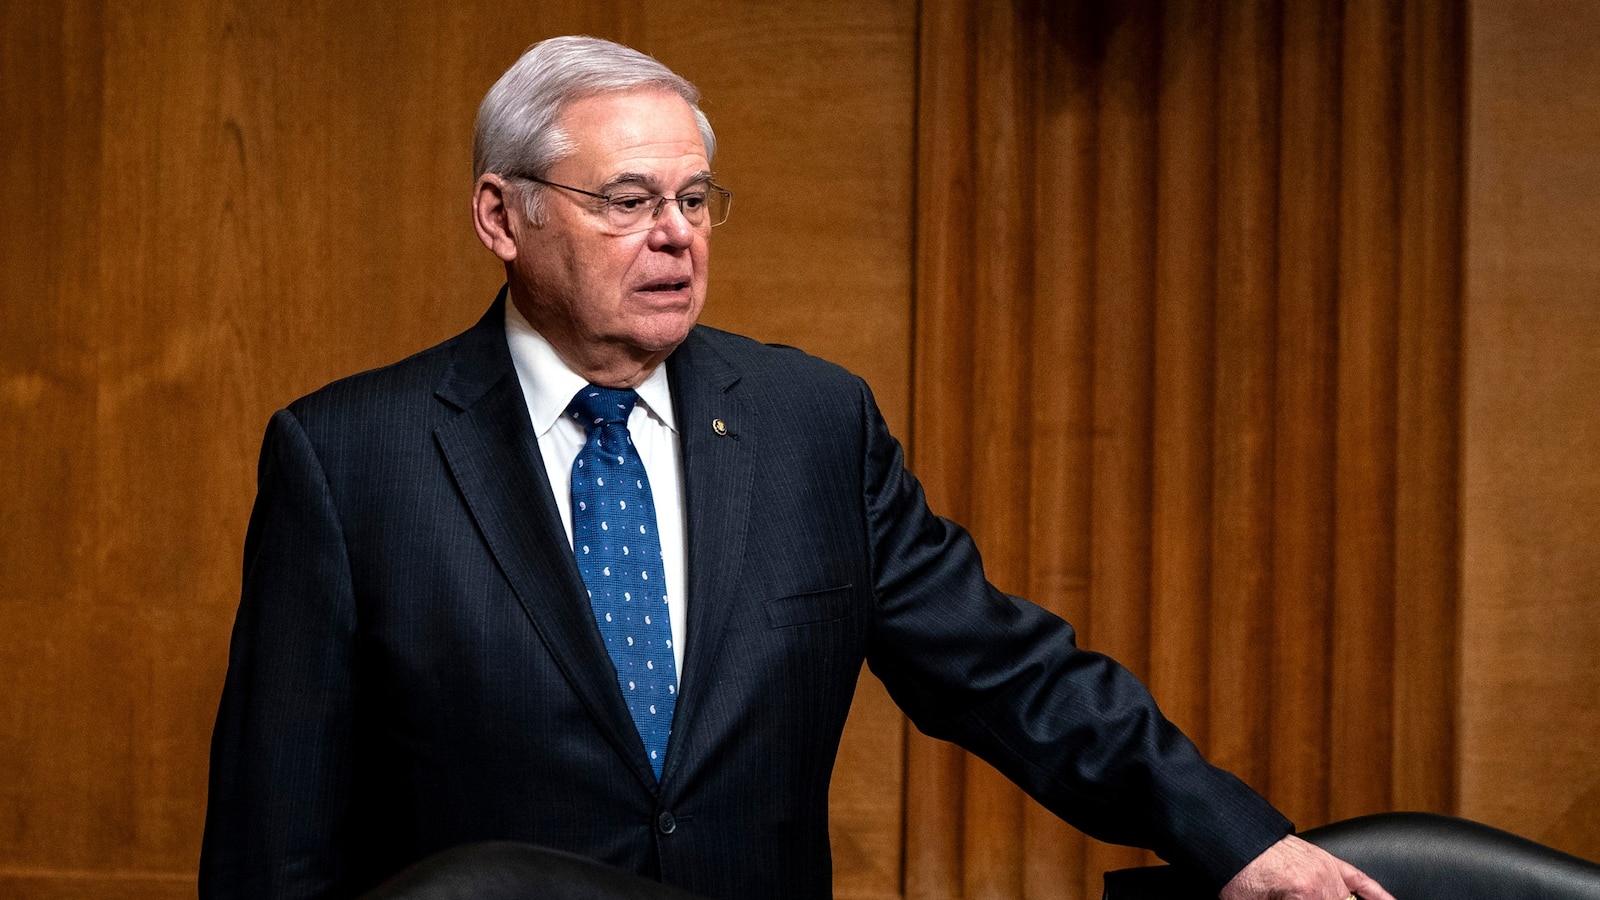 Sen. Menendez not seeking another term as Democrat, suggests he could go independent